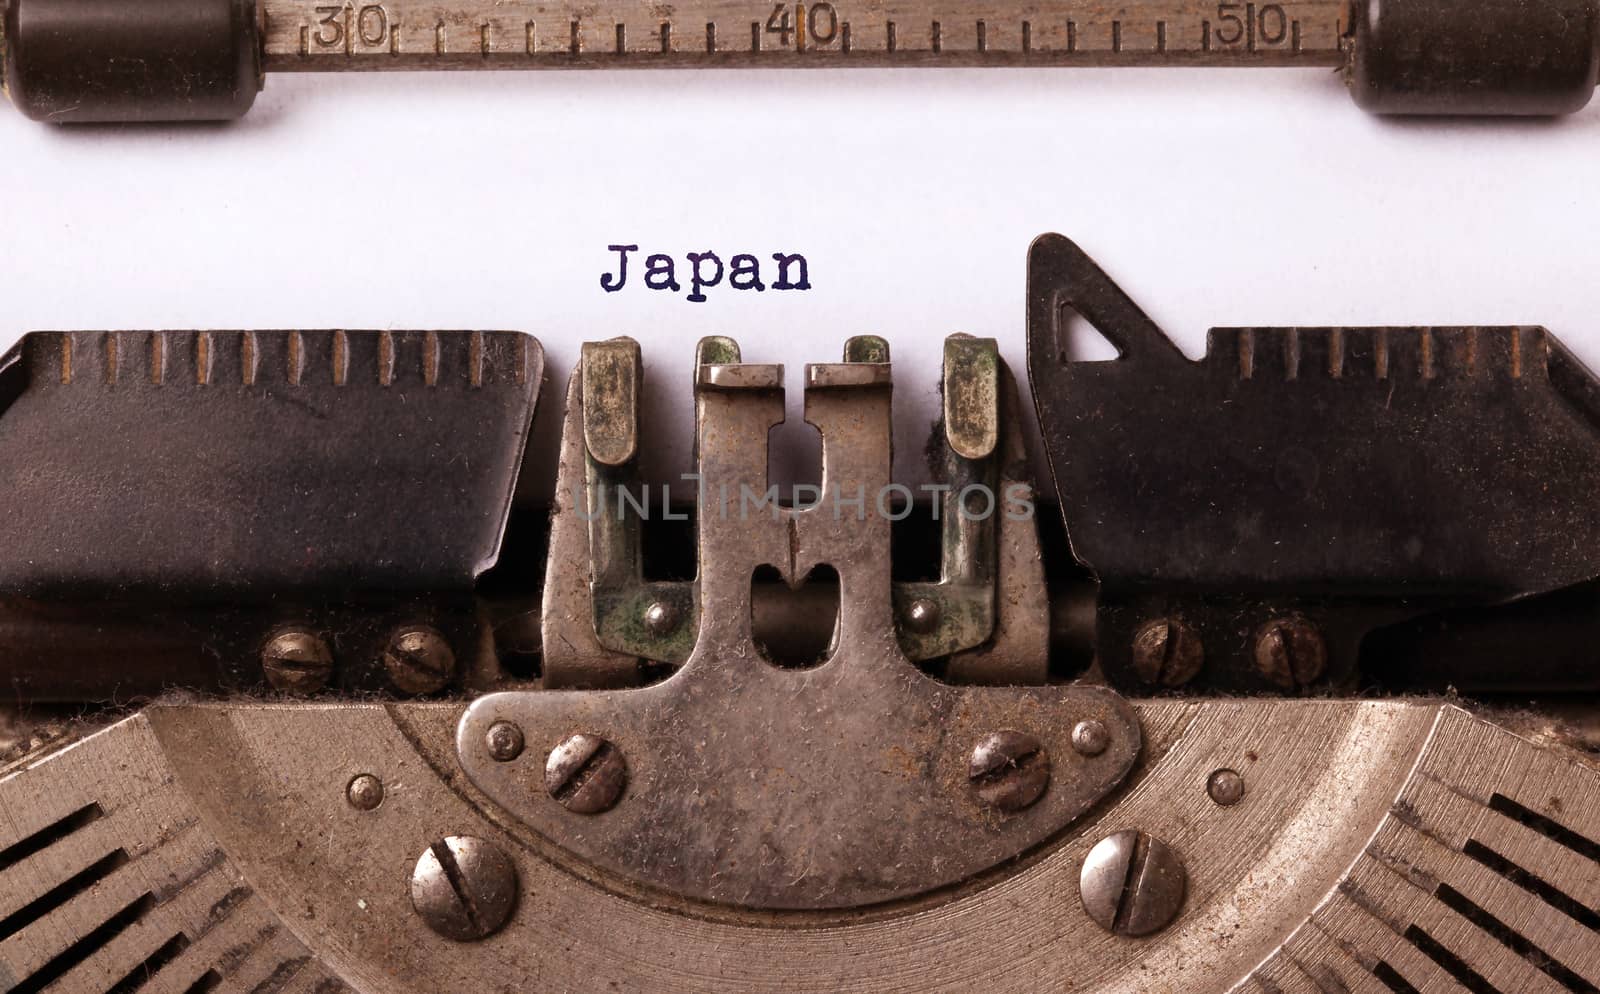 Inscription made by vinrage typewriter, country, Japan